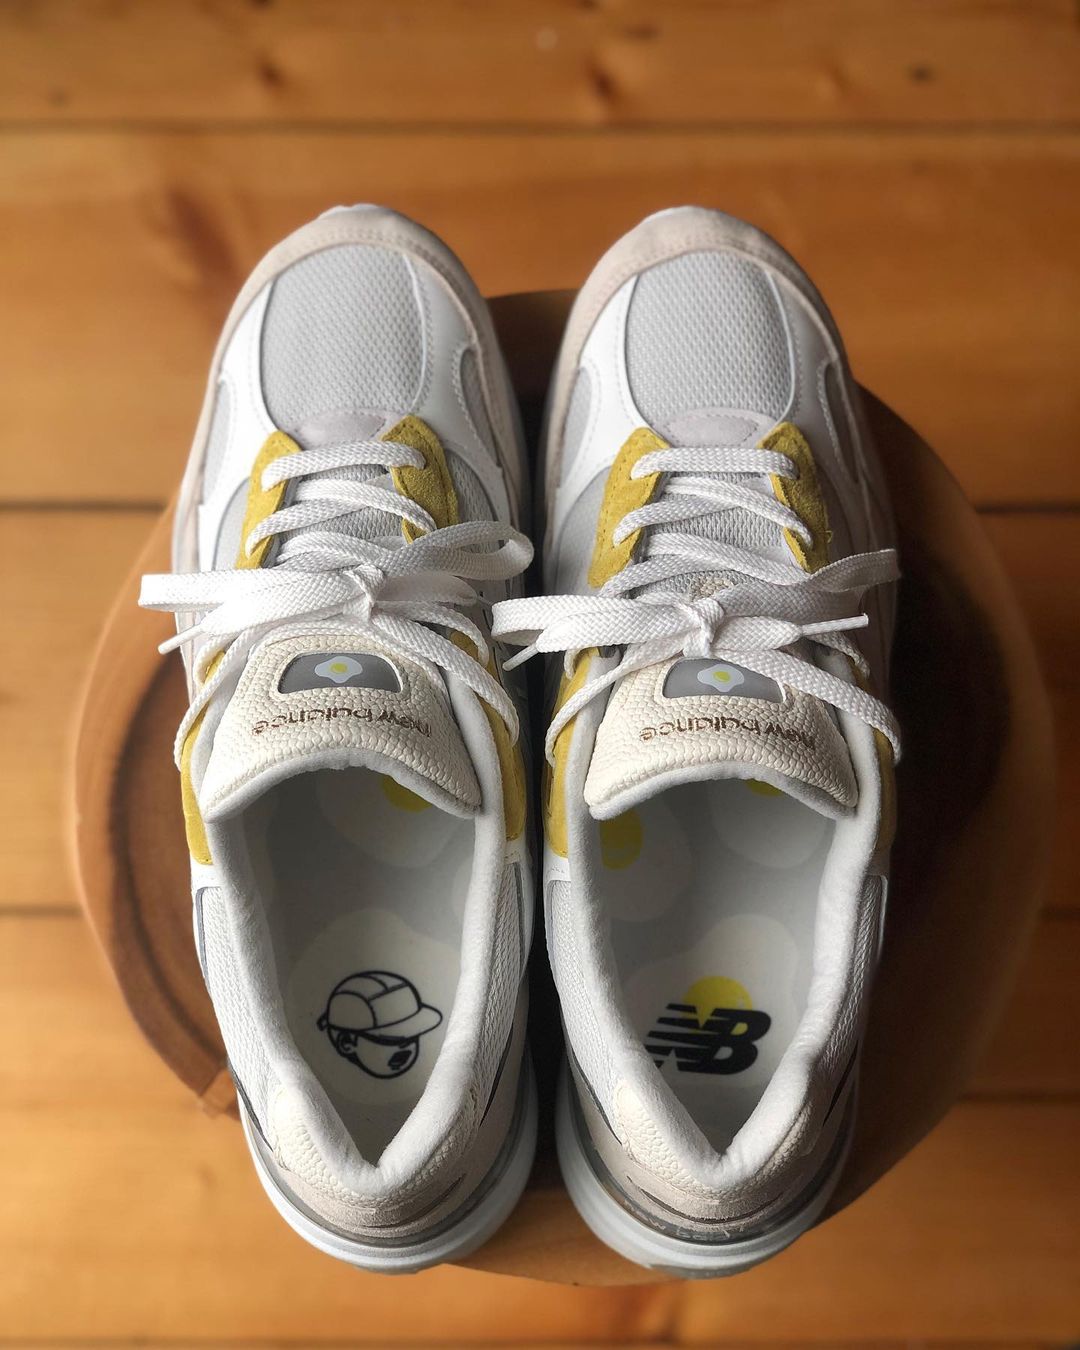 First Look at the Paperboy Paris x New Balance 992